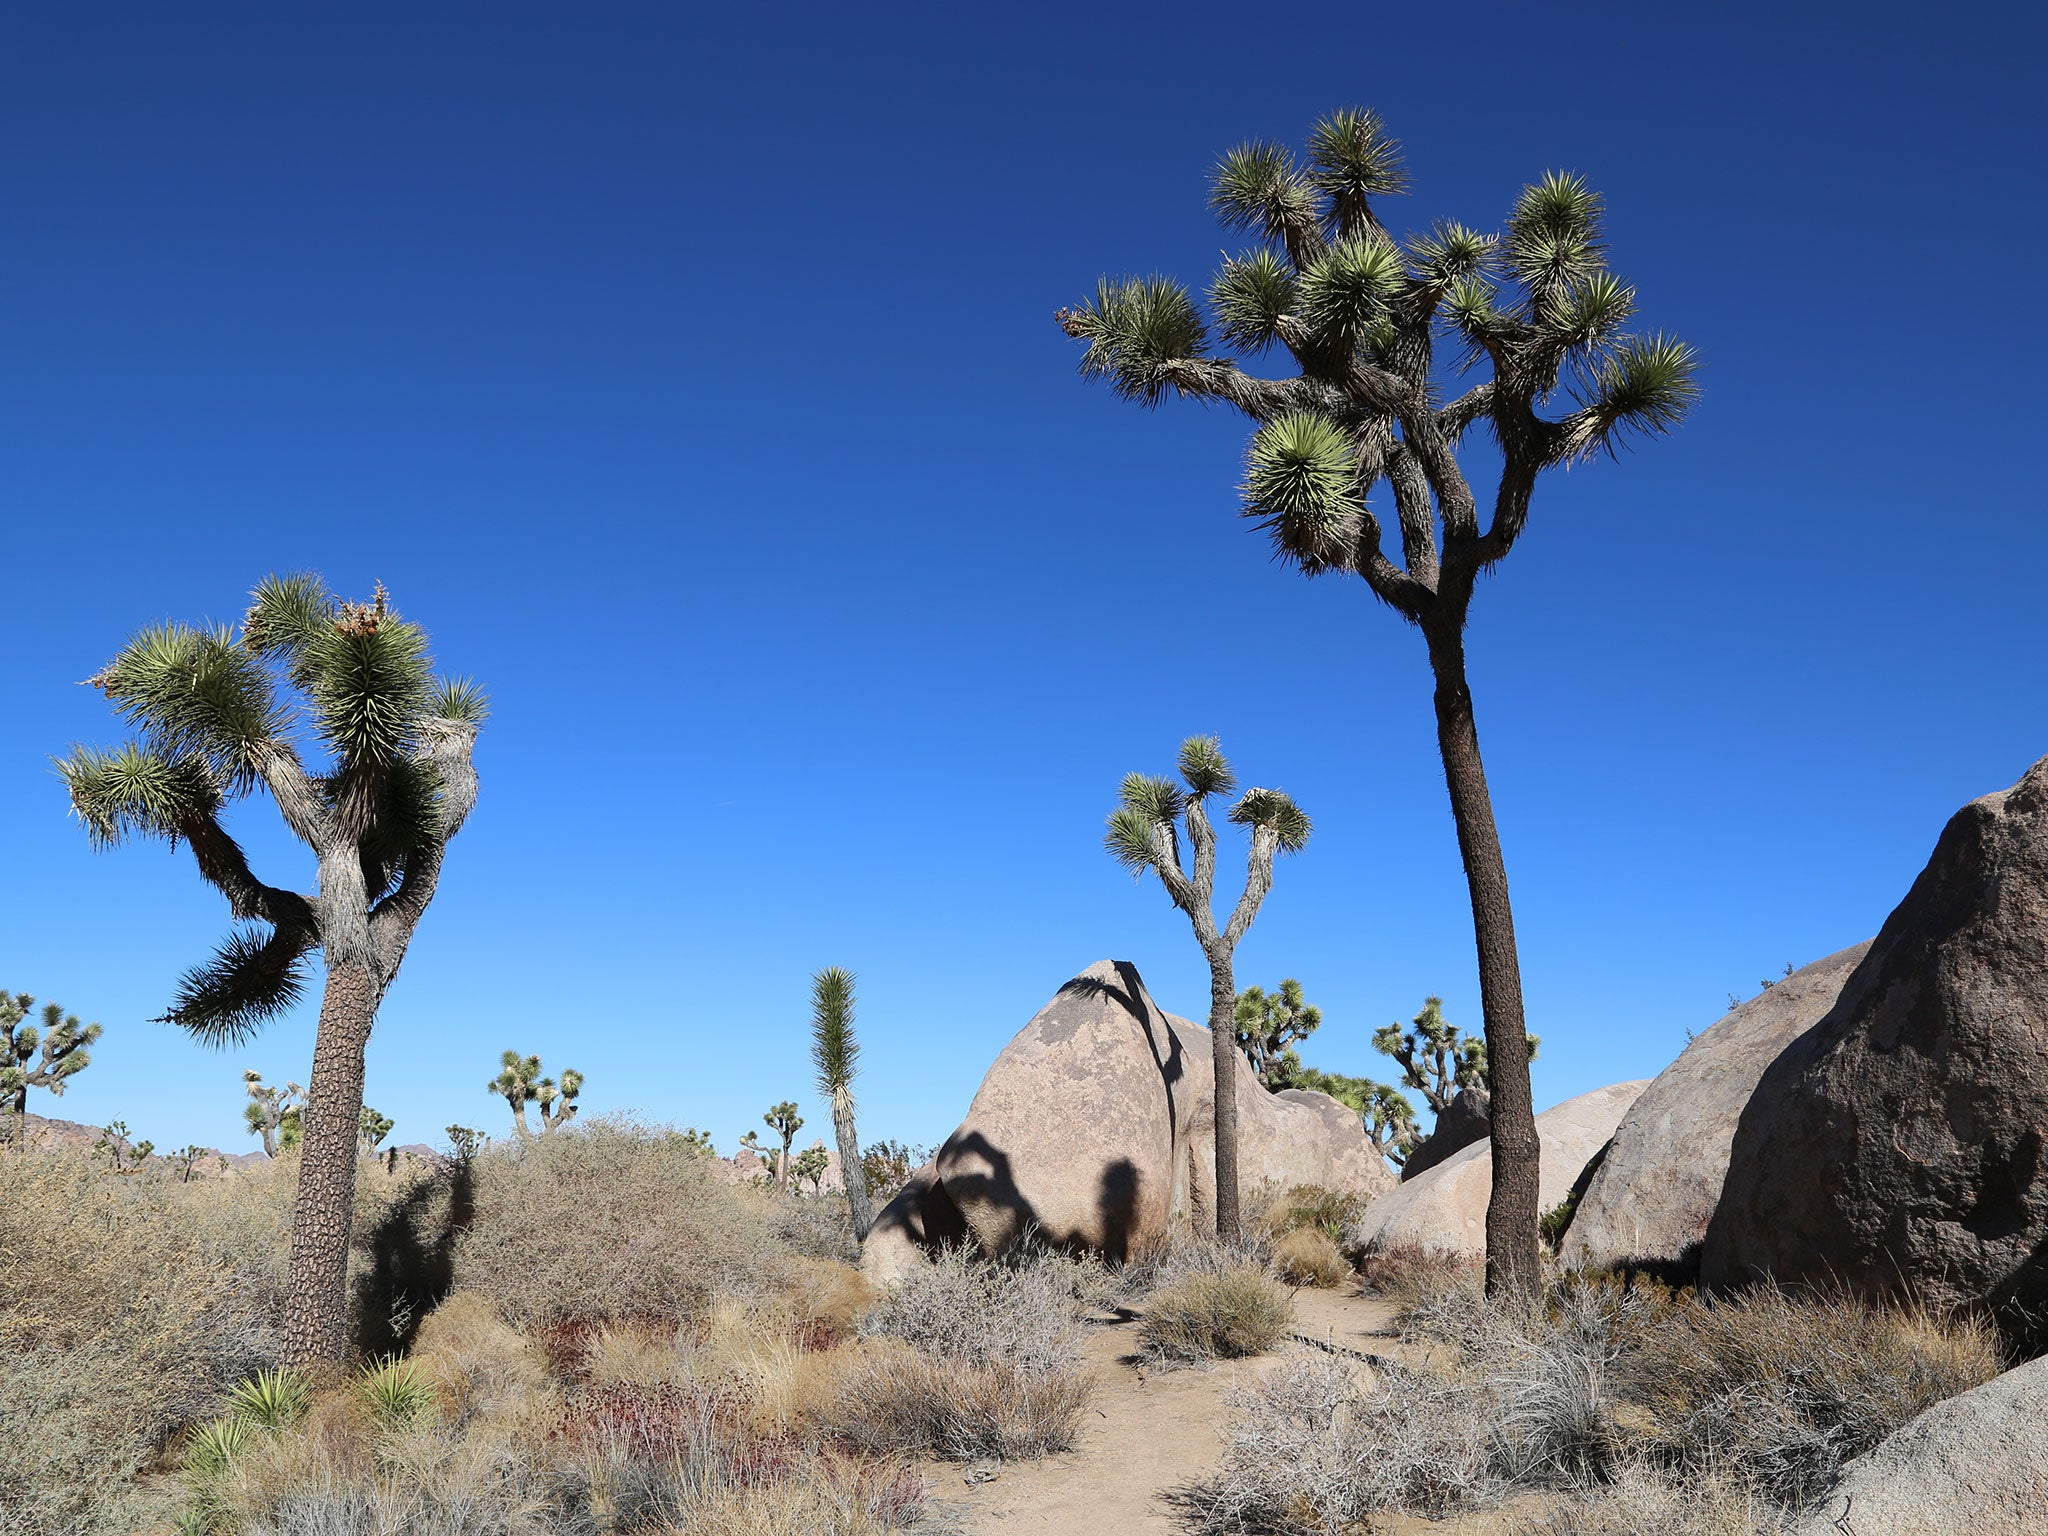 The eponymous Joshua trees in the national park